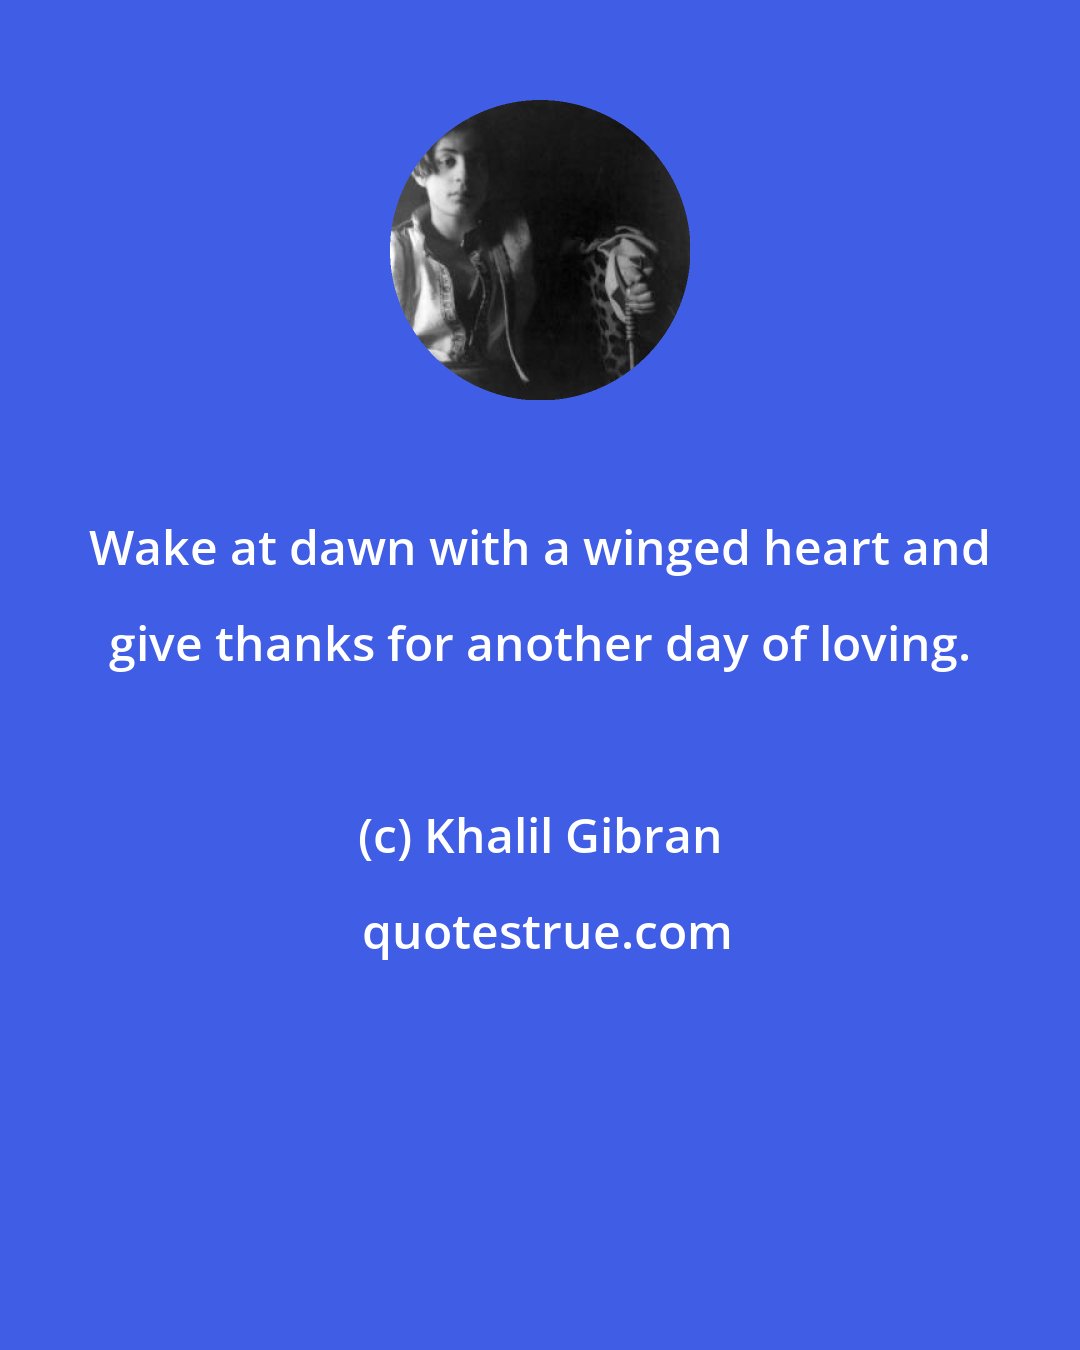 Khalil Gibran: Wake at dawn with a winged heart and give thanks for another day of loving.